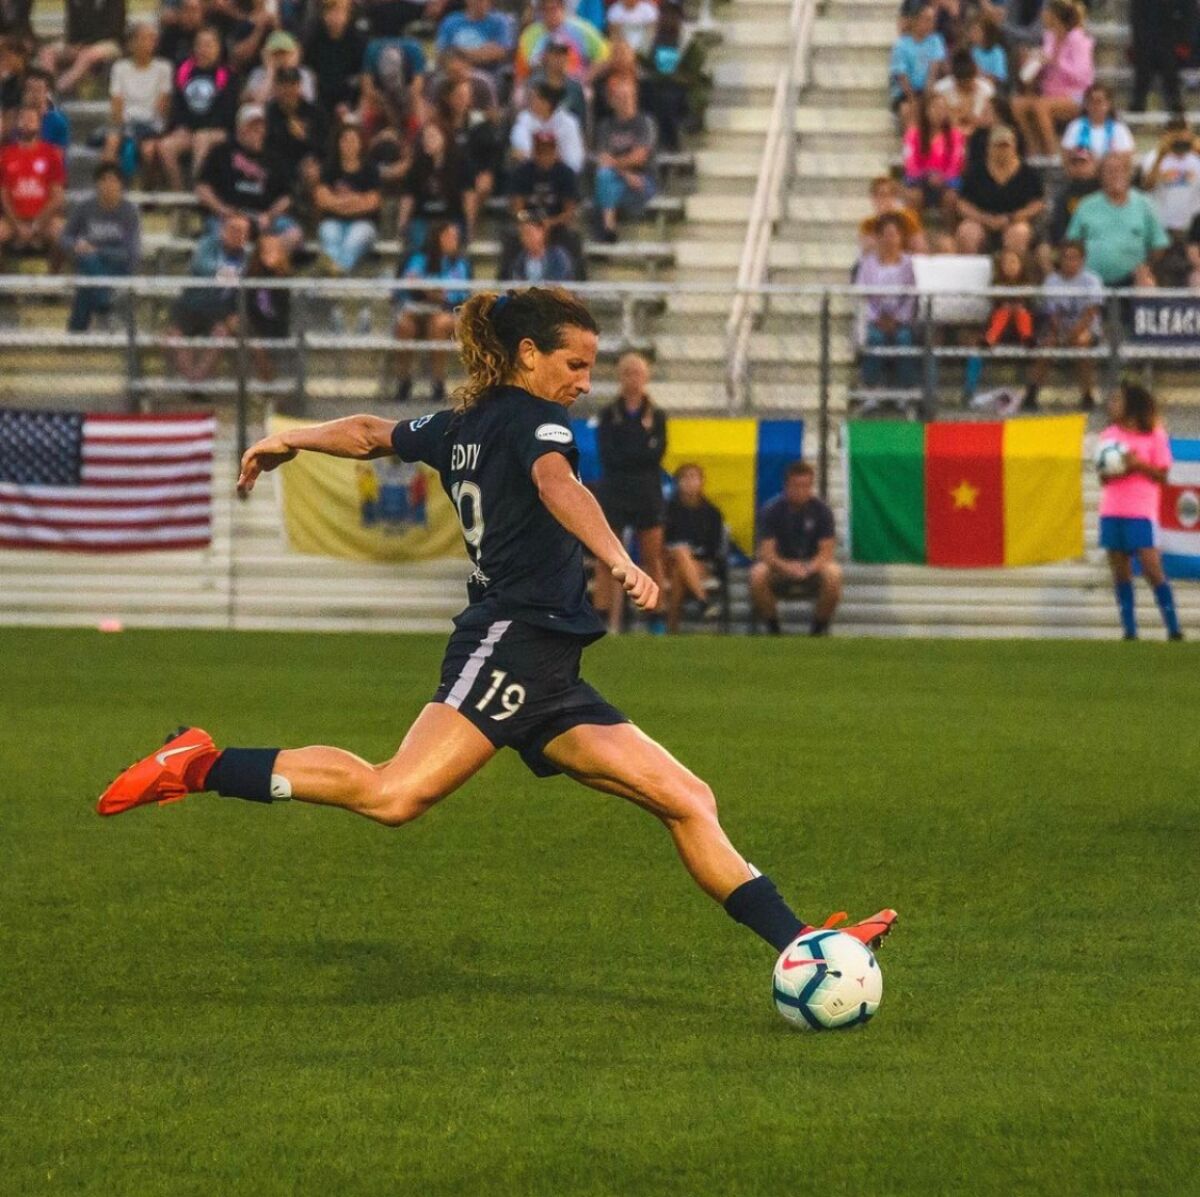 Newport Harbor High graduate Elizabeth Eddy is a professional soccer player who most recently played in Sweden.